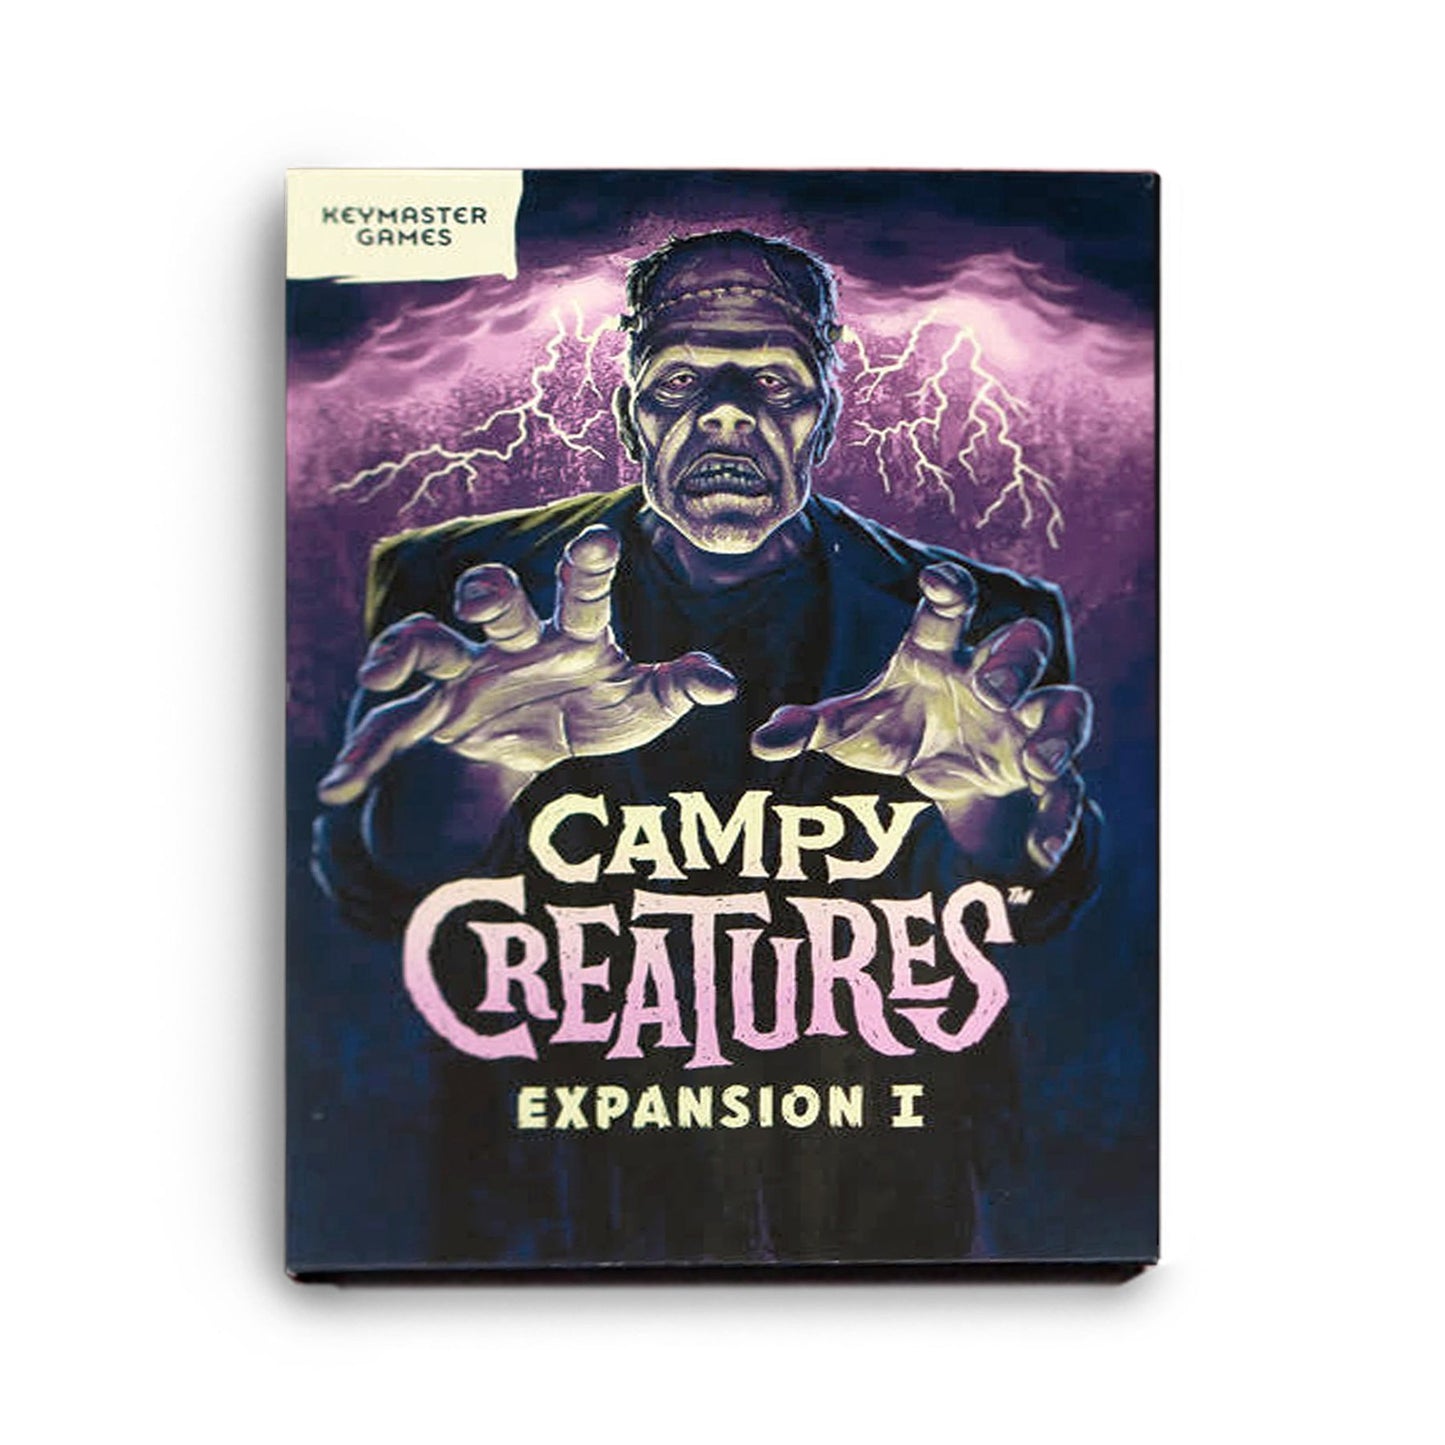 CAMPY CREATURES EXPANSION 1